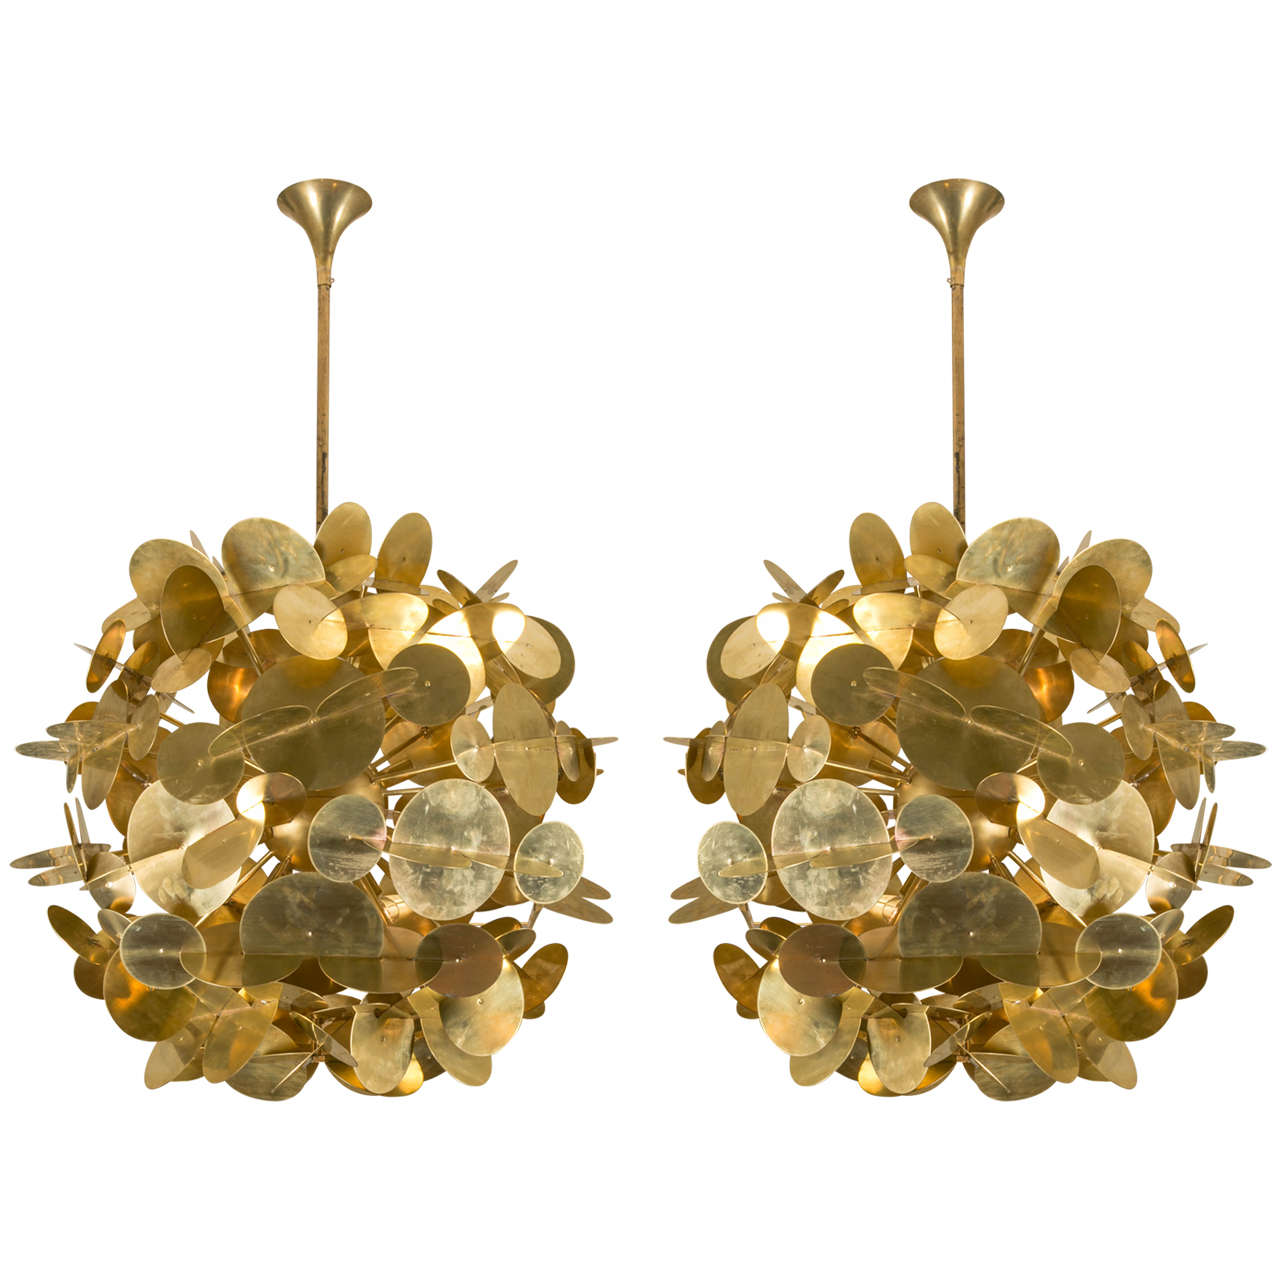 Pair of Chandeliers For Sale